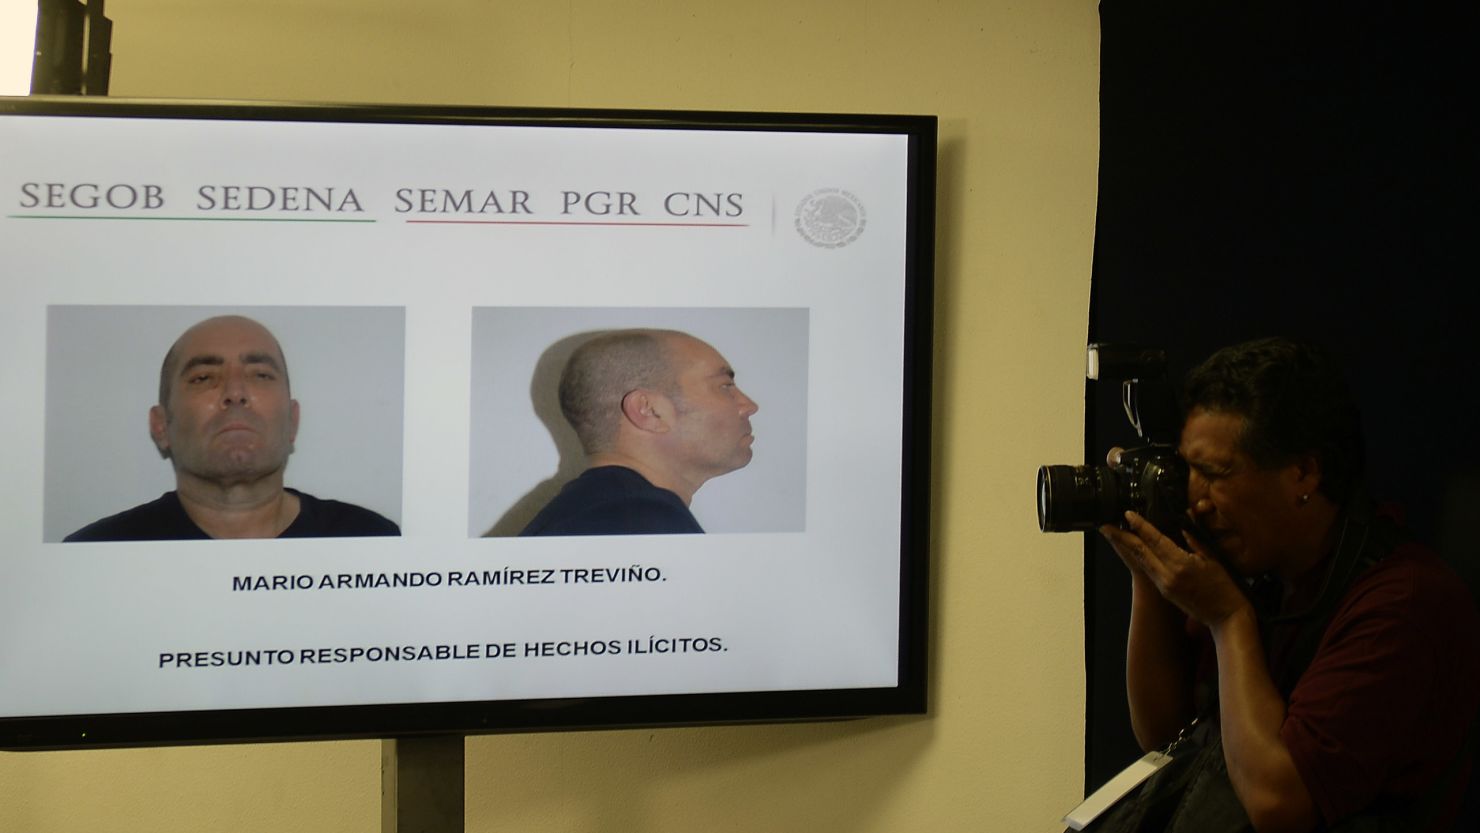 Pictures of Mario Armando Ramirez Trevino are presented during a press conference in Mexico City on August 18.